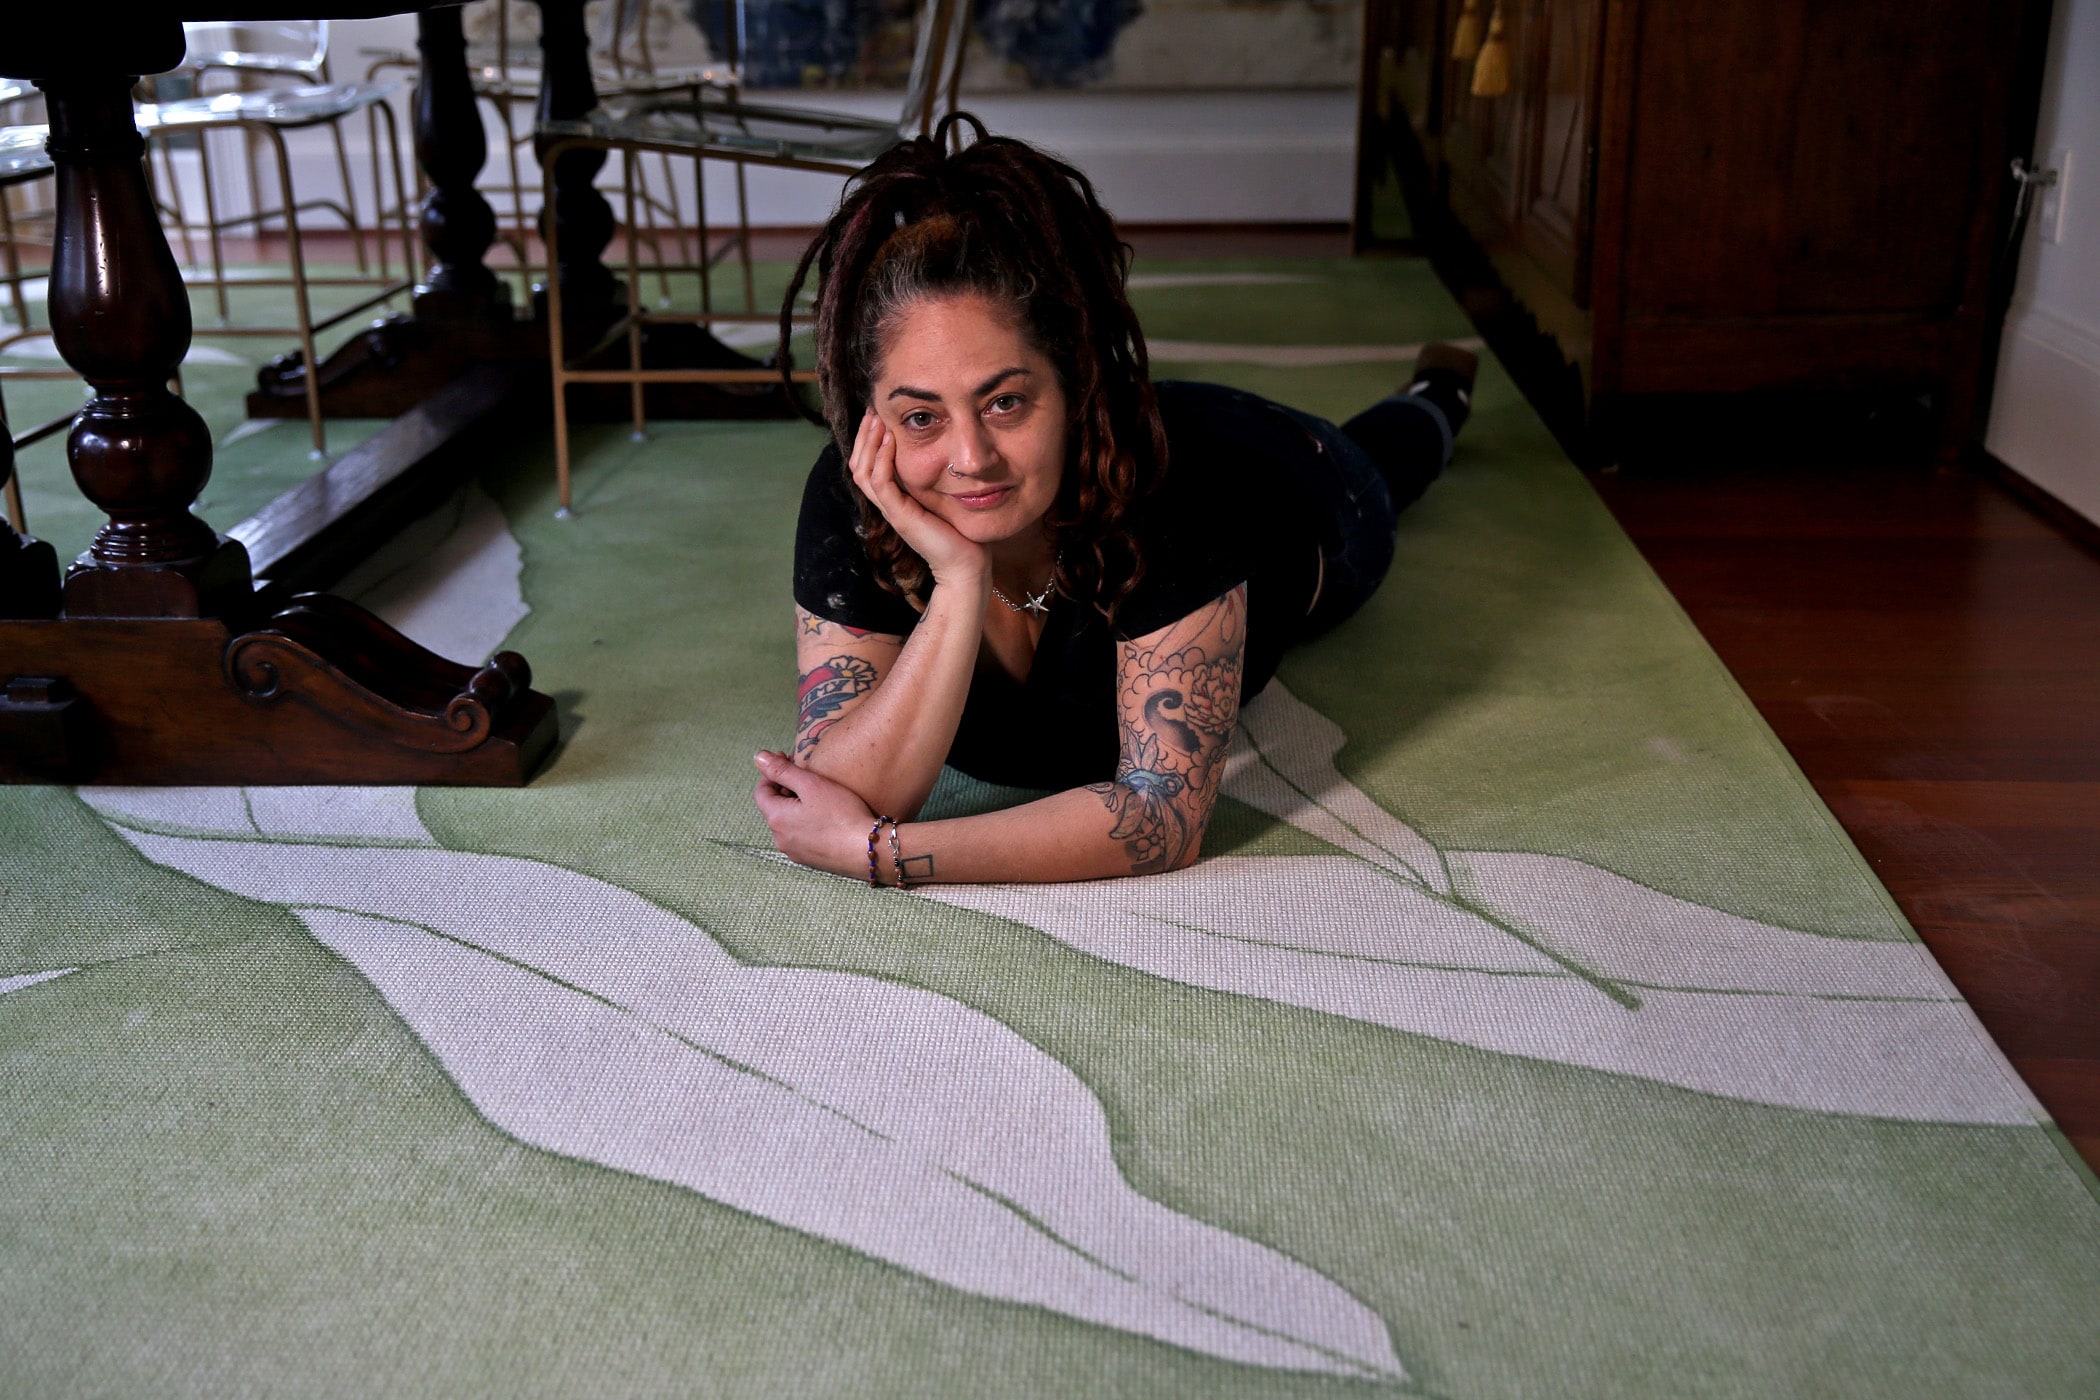 Artist Ann Marie Auricchio with a rug she designed in an Old Metairie home on Friday, November 22, 2019. (Photo by Michael DeMocker)